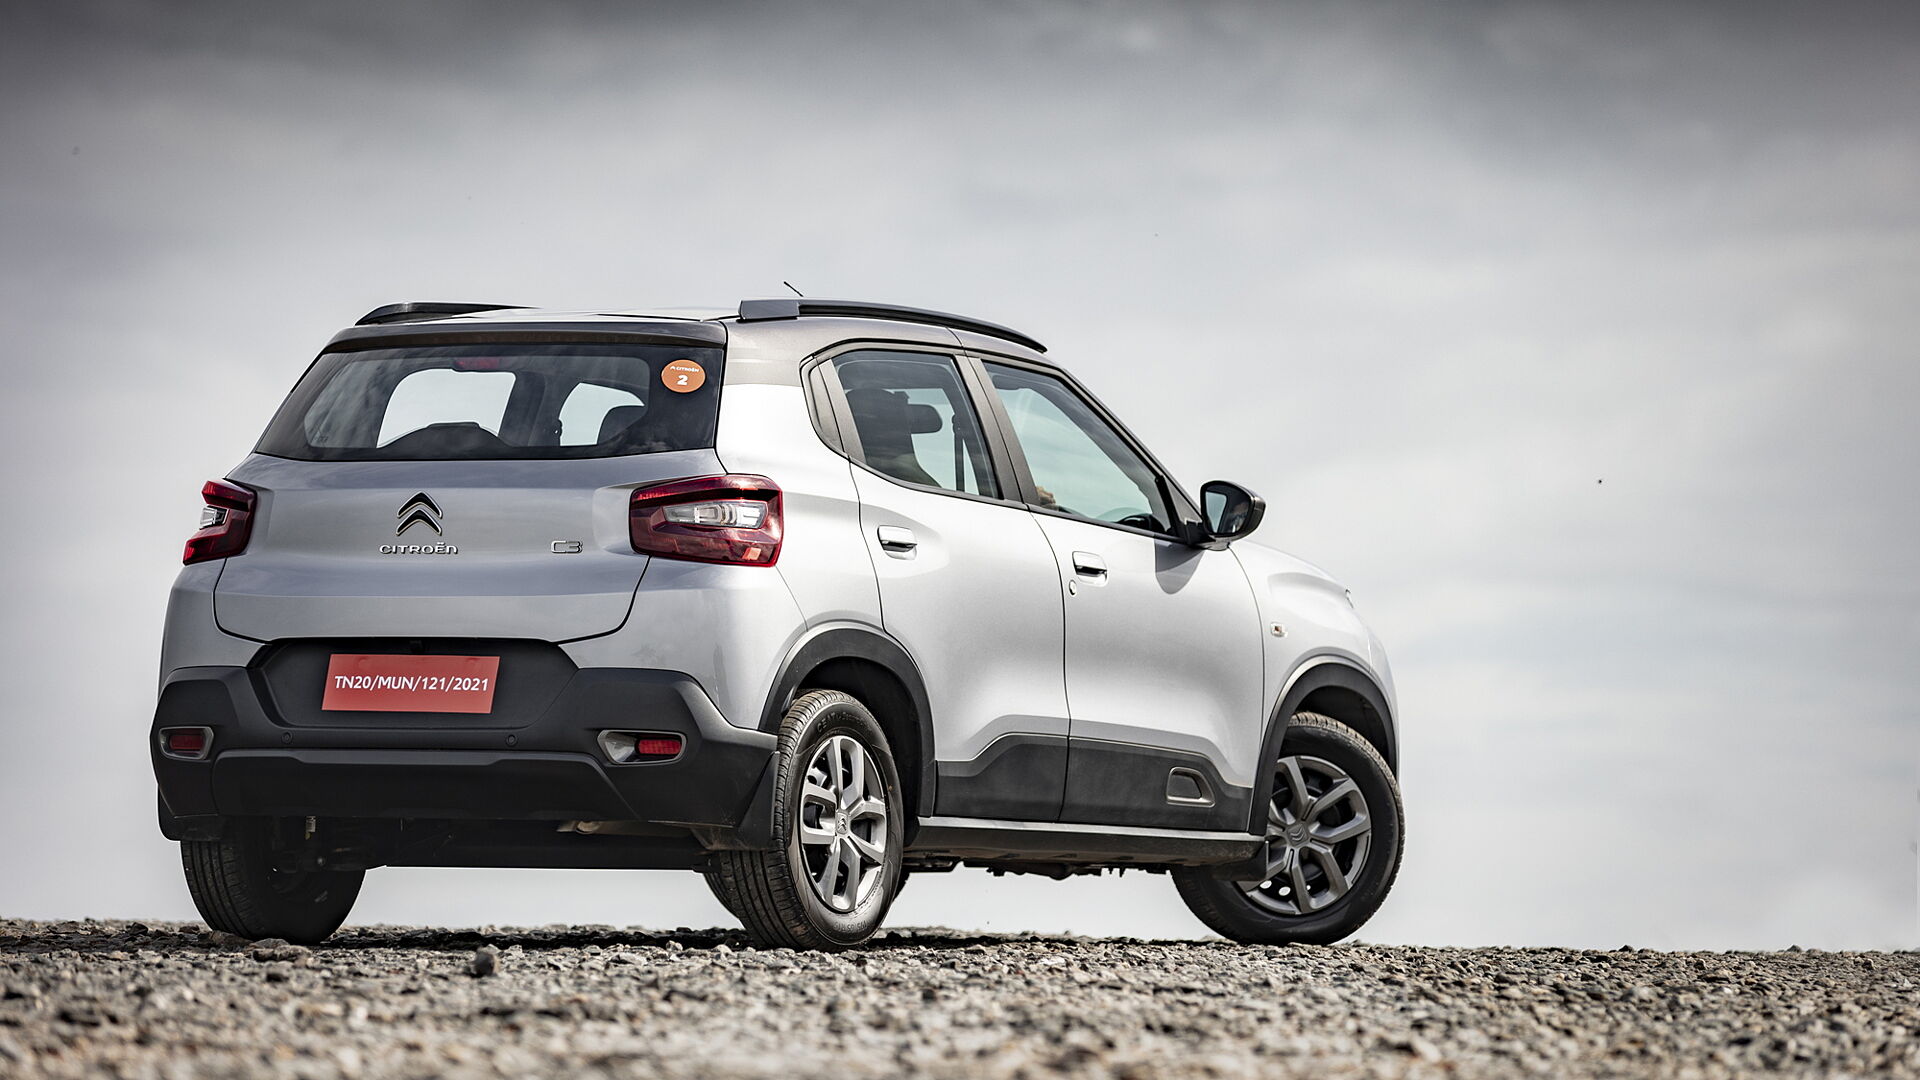 New Citroen C3 You targets city car buyers with £12,995 price tag